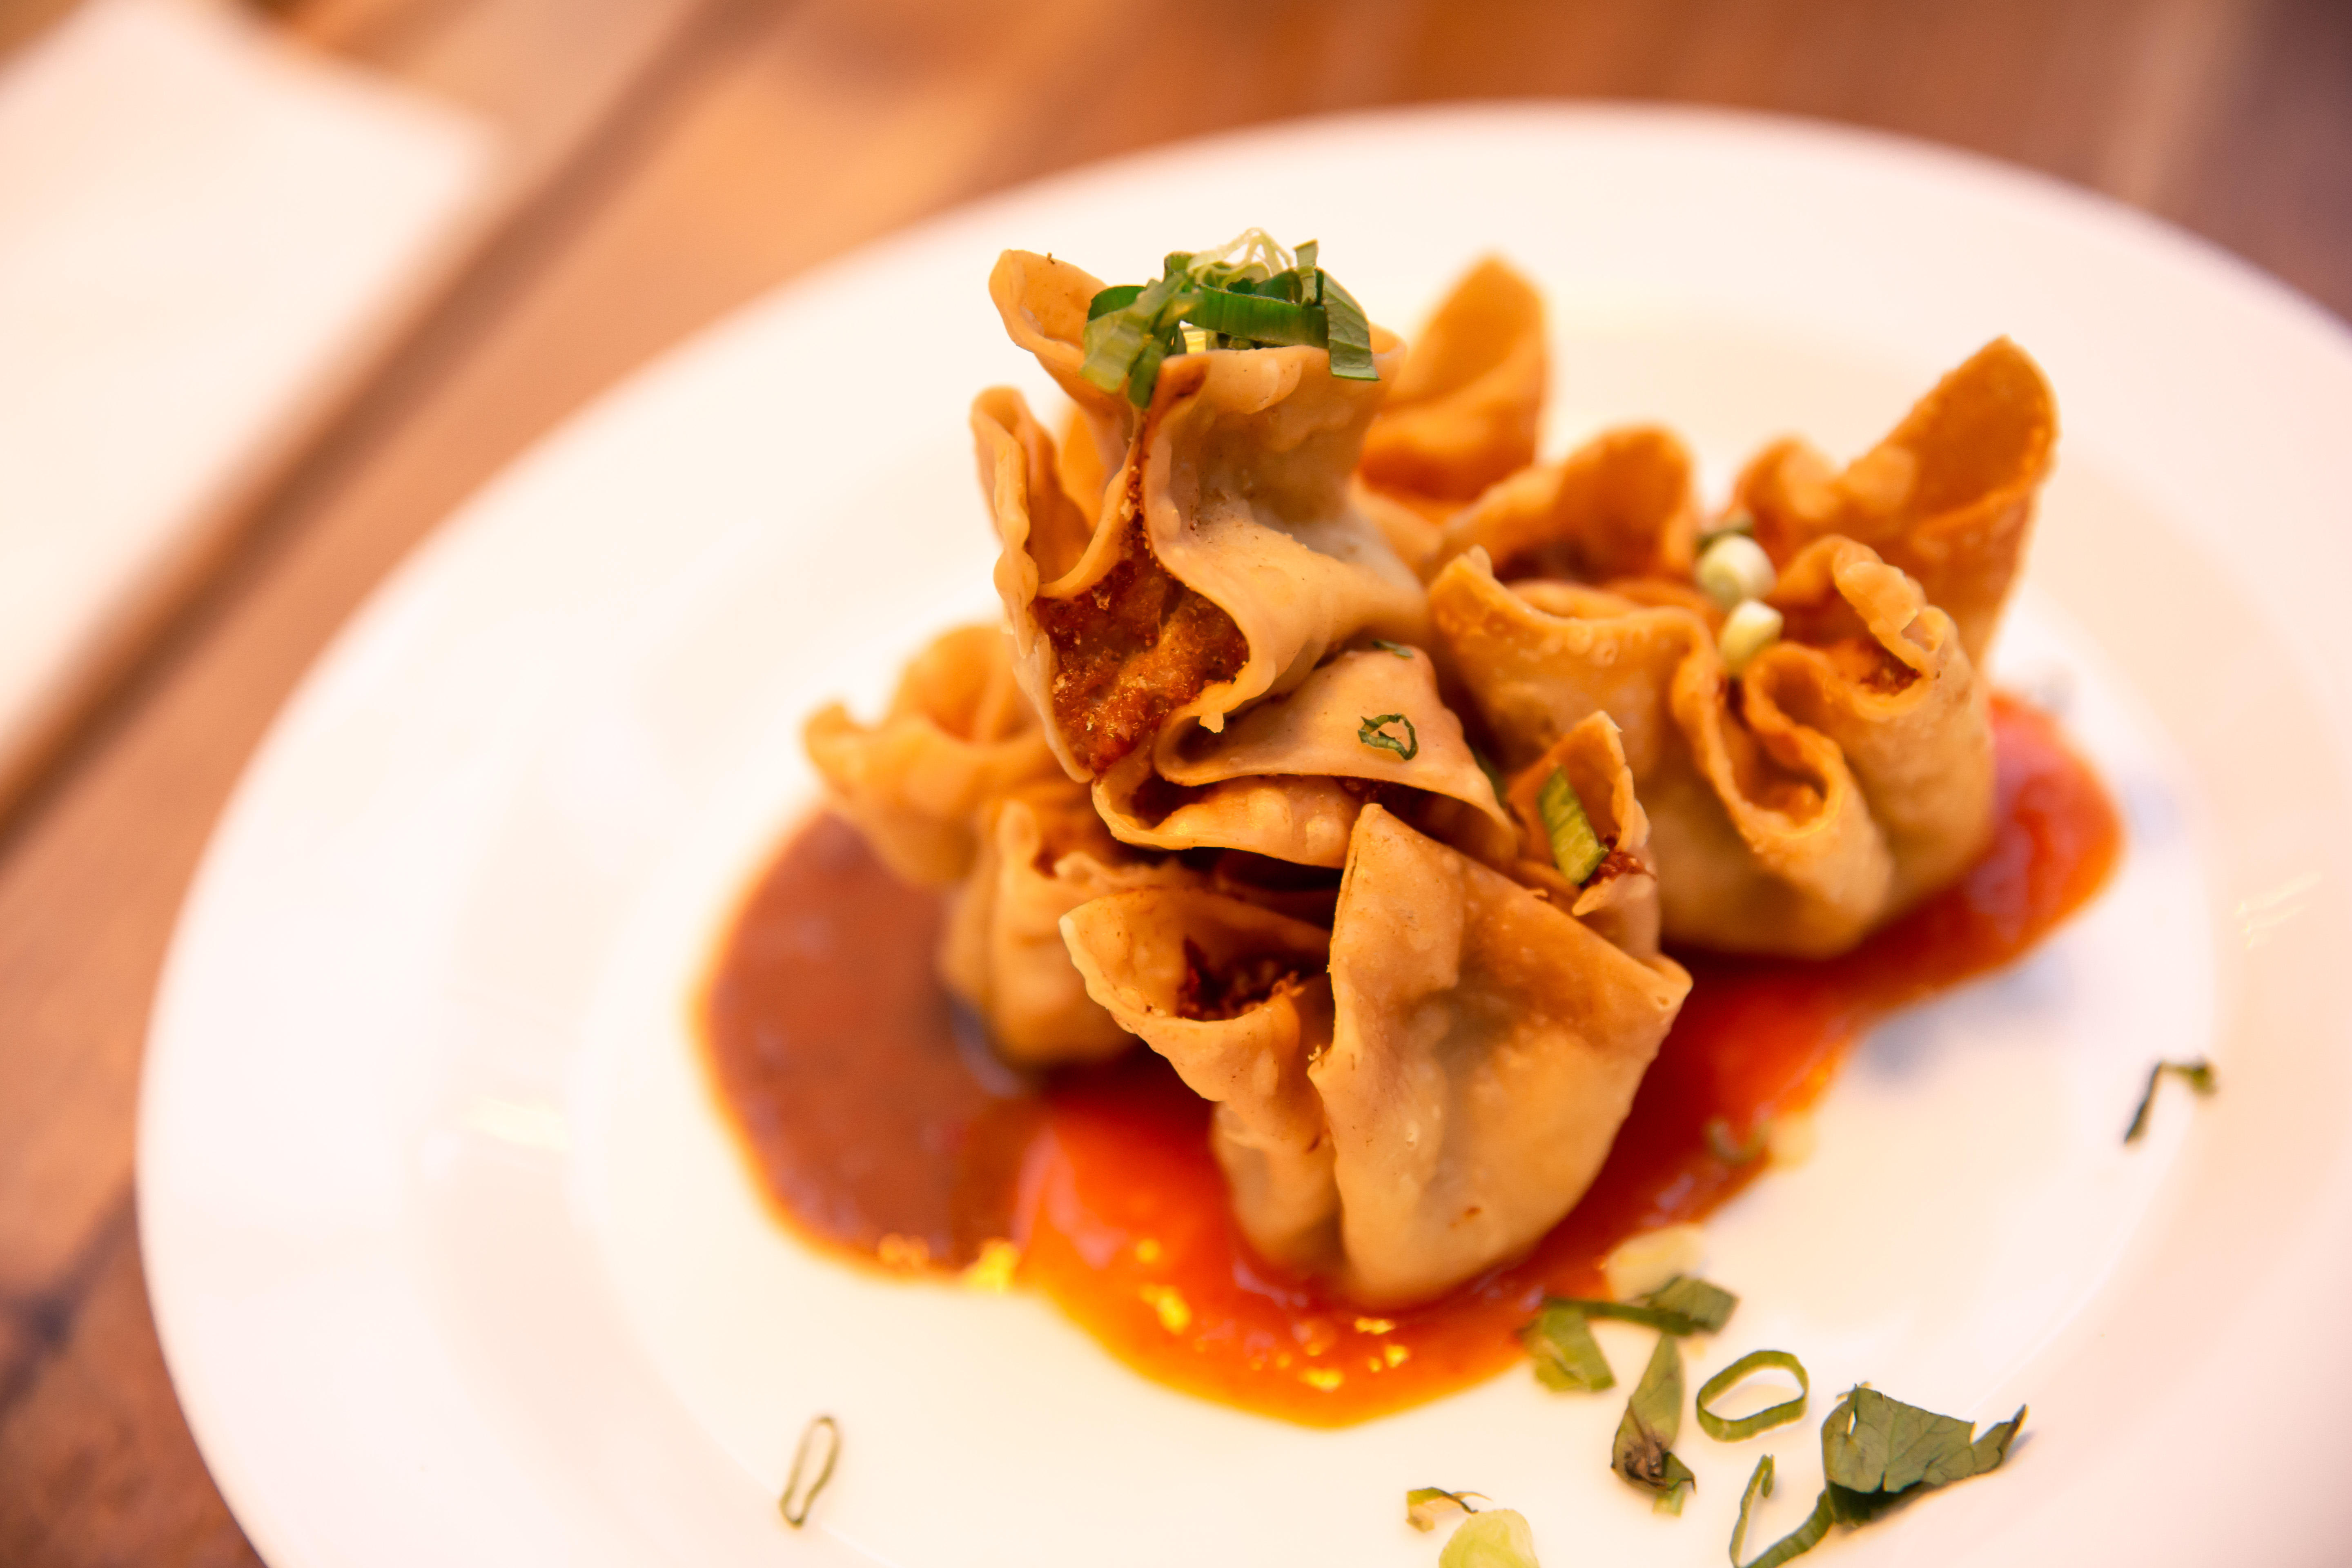 Sundanese Indonesian traditional food Fried Dumplings (Batagor) with peanut and chilli sauce on a white plate